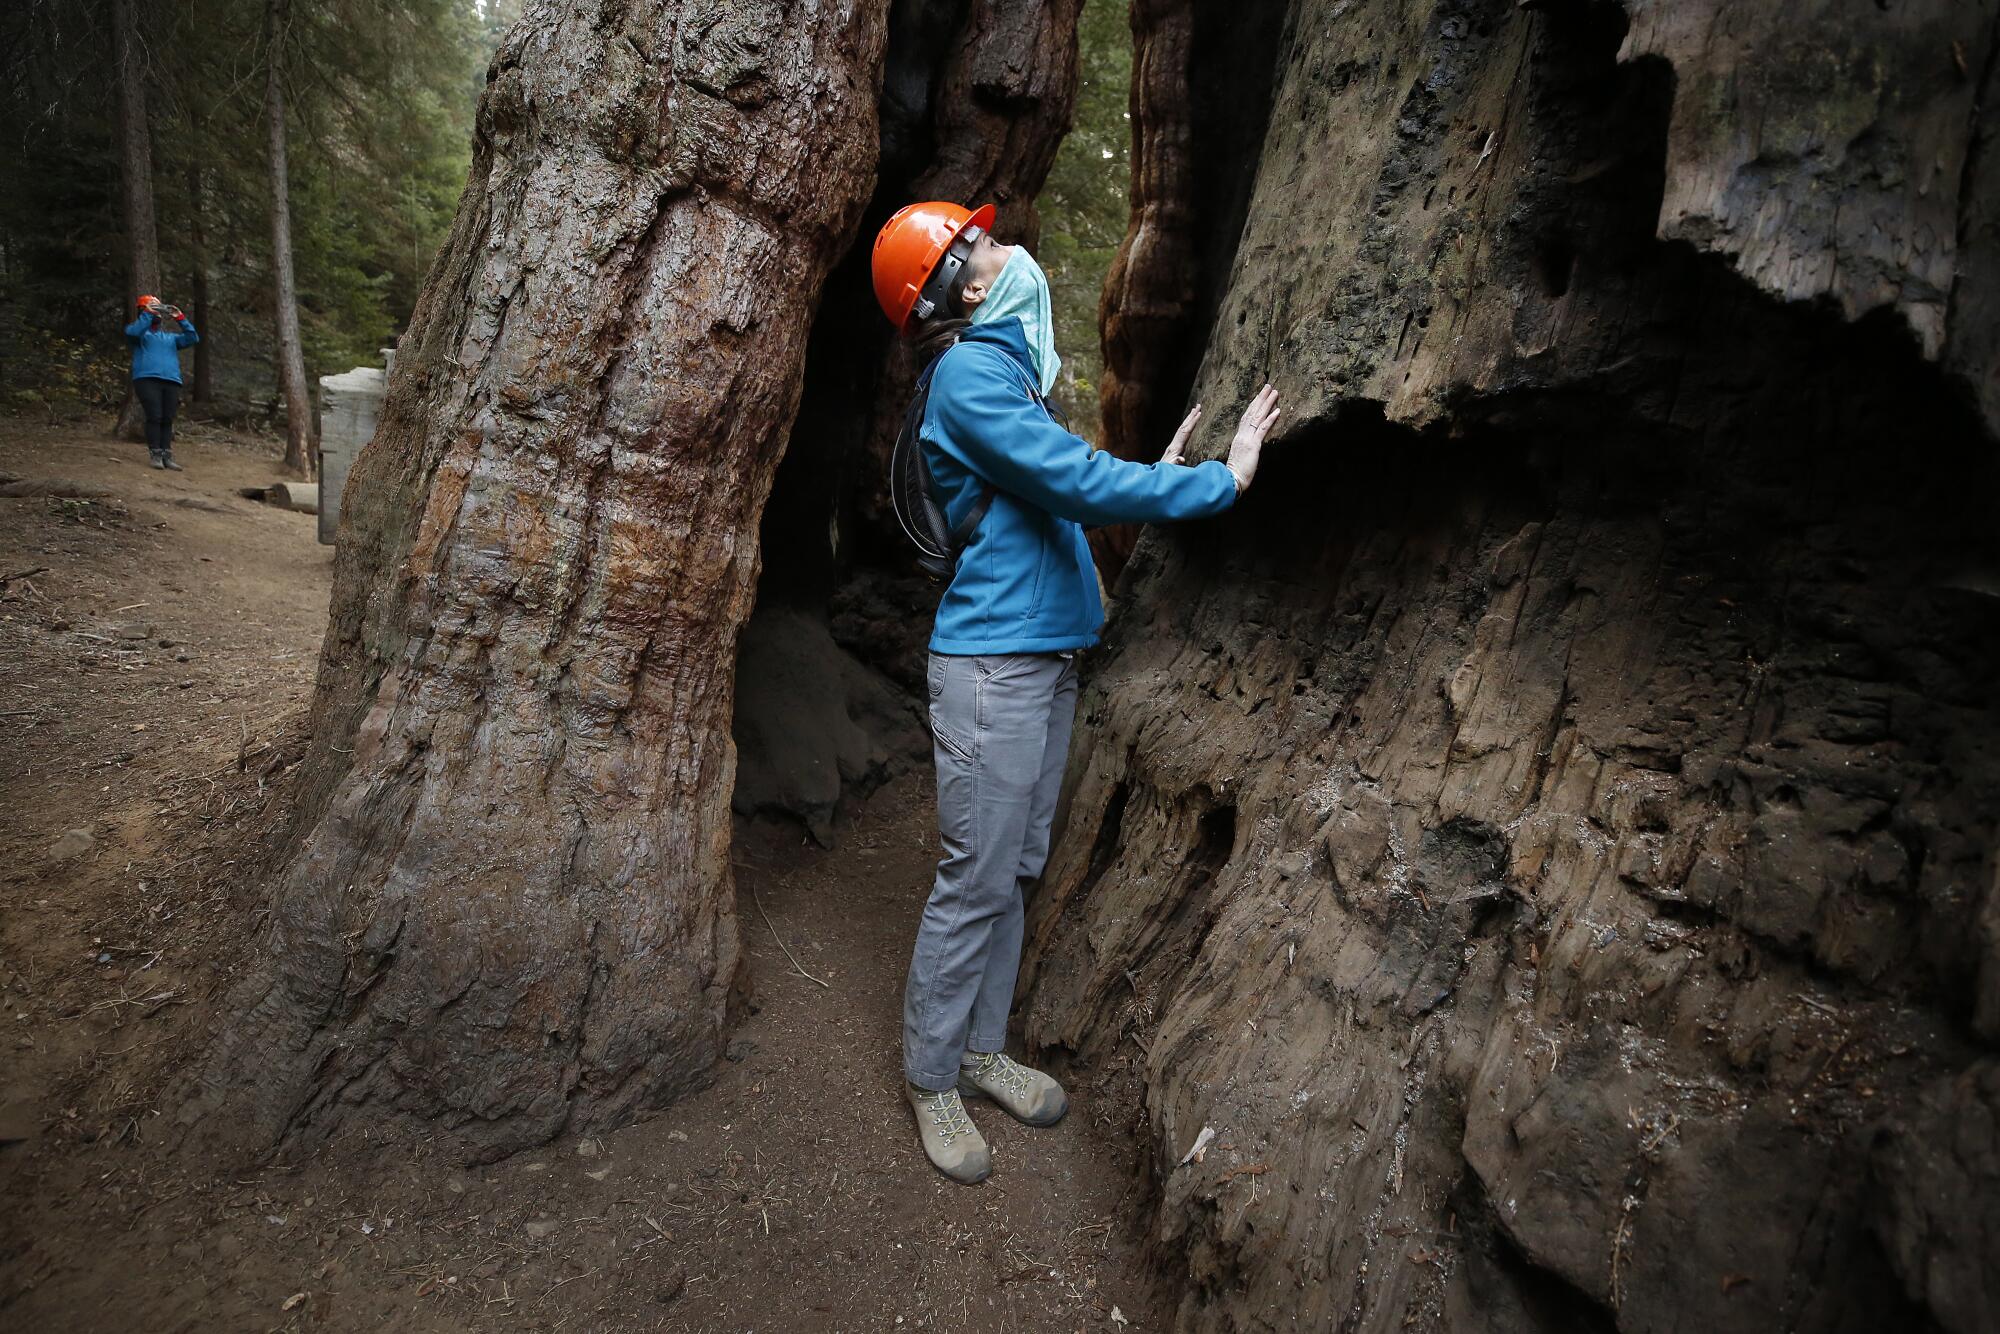 A woman in an orange hard hat walks through a gap in the base of a massive tree and looks up